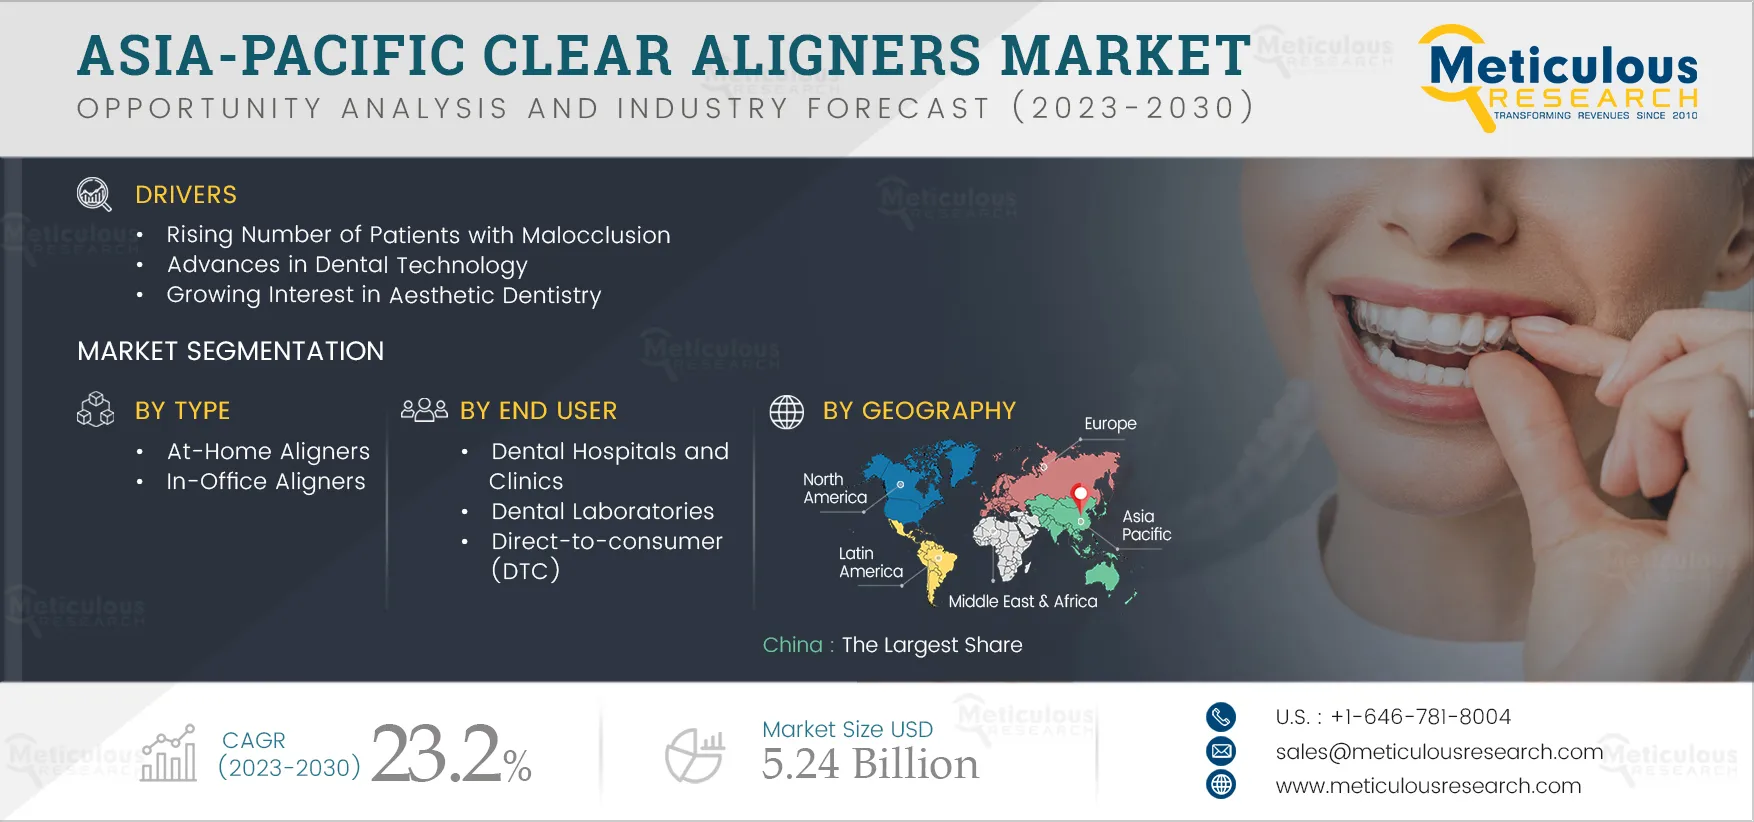 Asia-Pacific Clear Aligners Market